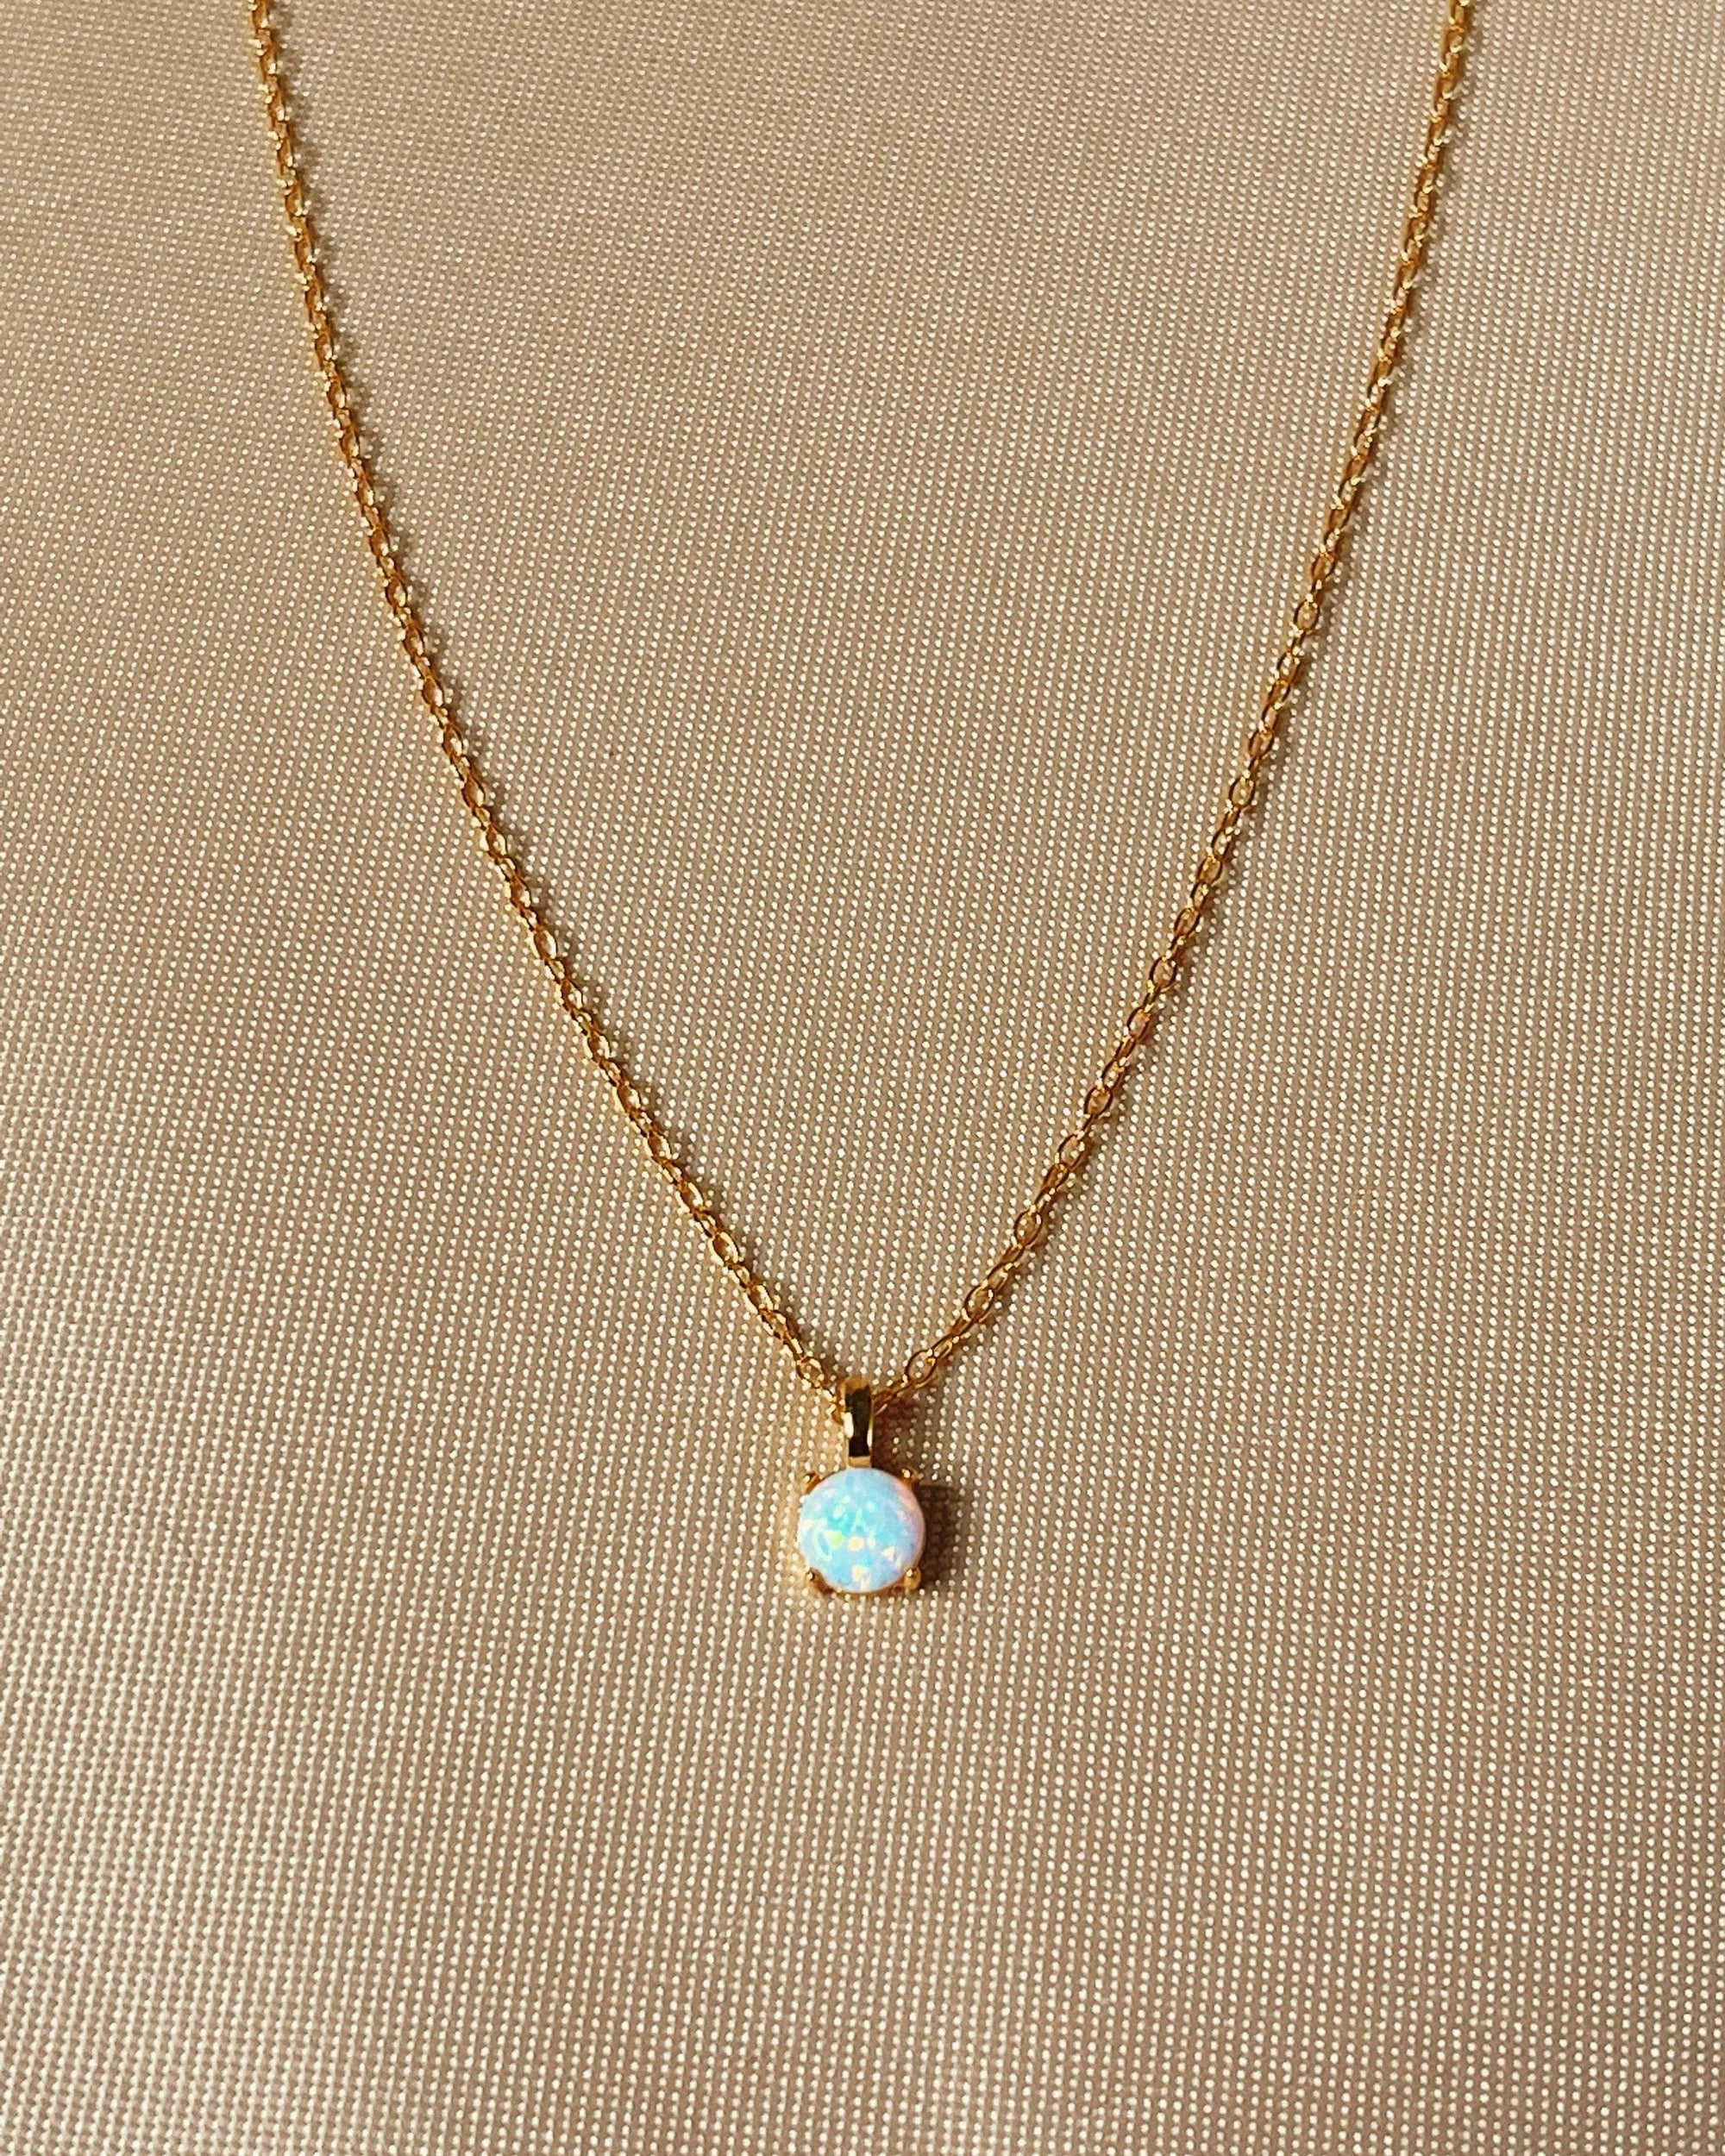 So Dainty Co. Necklaces Celeste Opal Gold Choker Necklace Gold Plated 925 Sterling Silver Jewelry